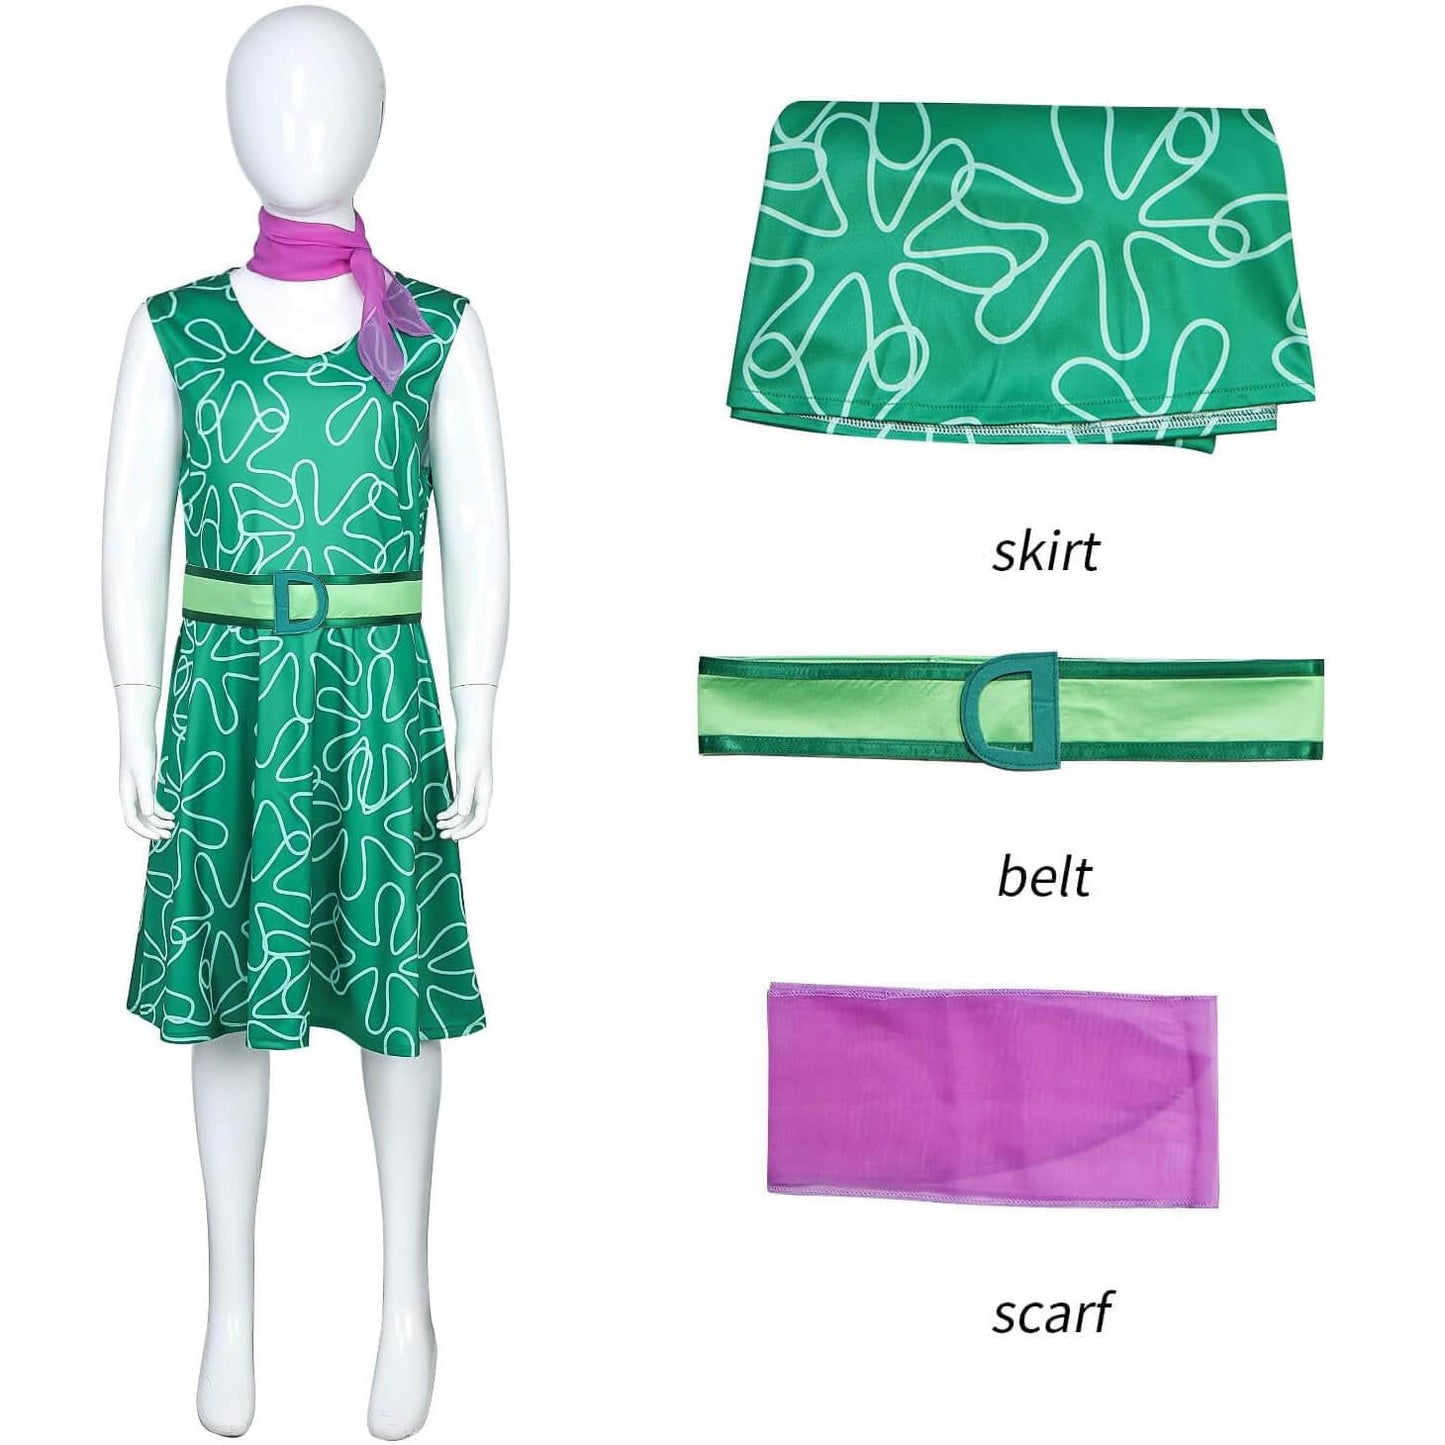 Inside Out Disgust Costume Green Sleeveless Dress with Belt and Scarf Kids Disgust Cosplay Outfit